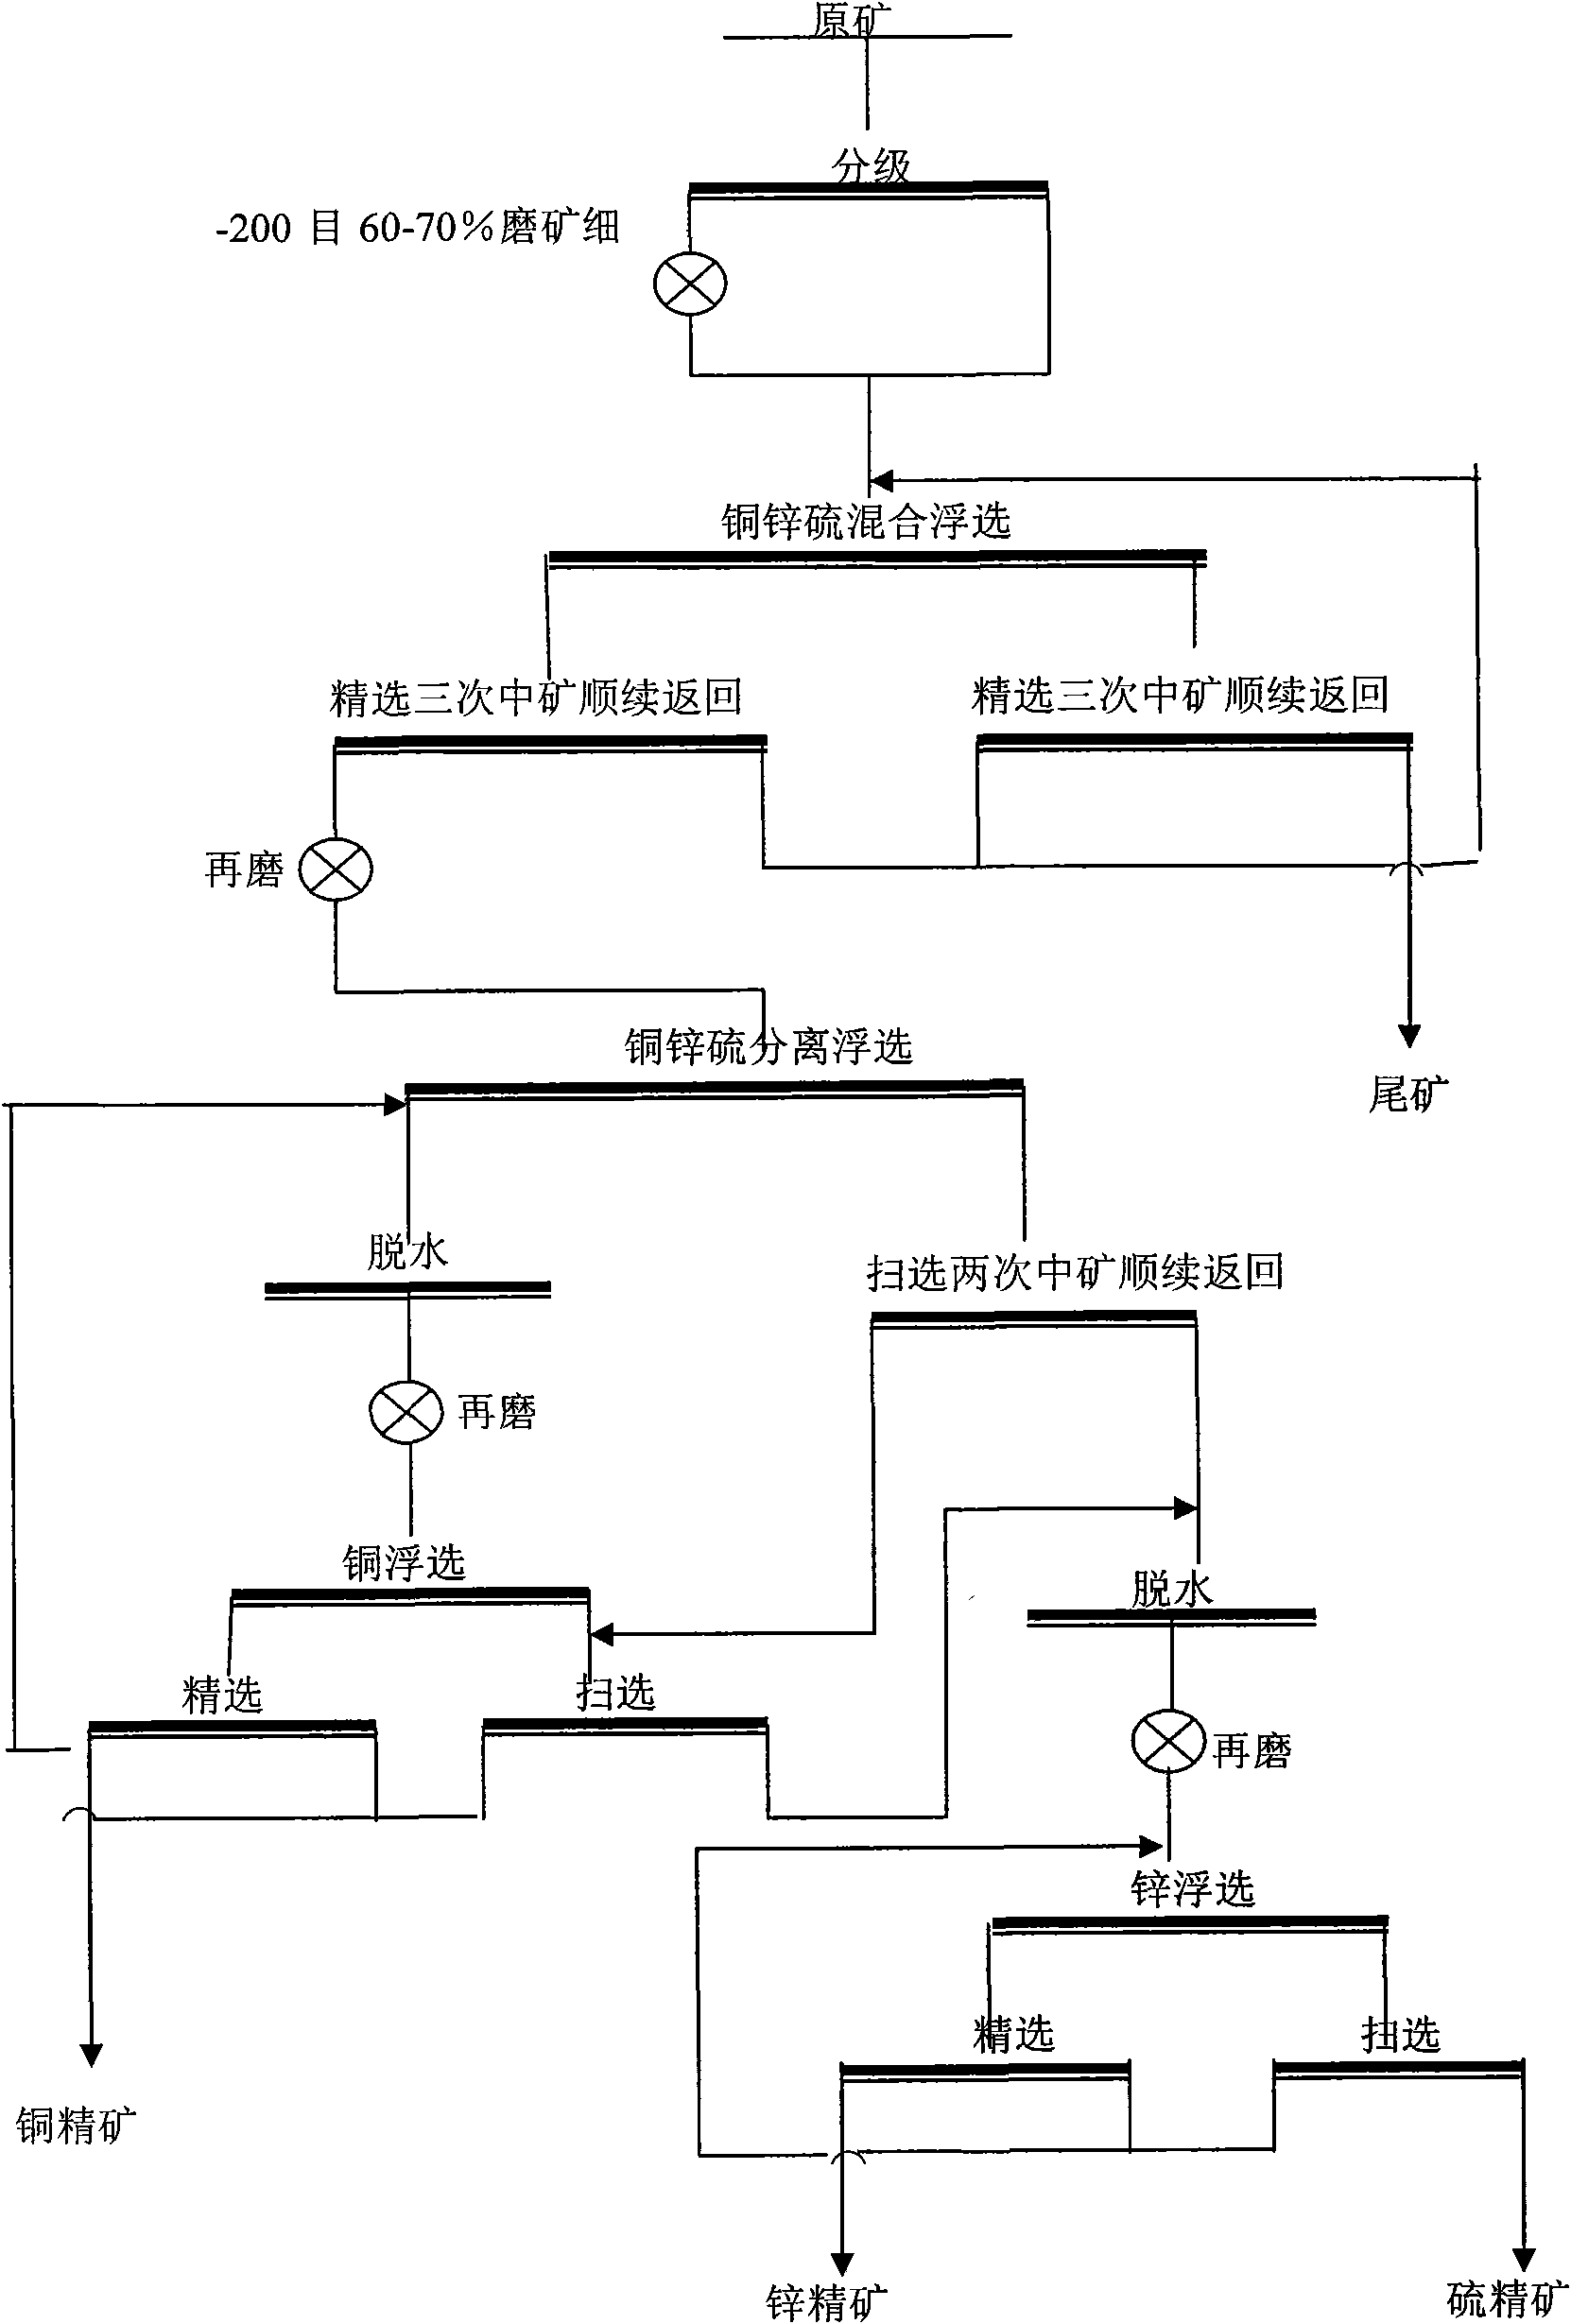 Ore-selecting method of difficultly-selected copper zinc sulphur ore